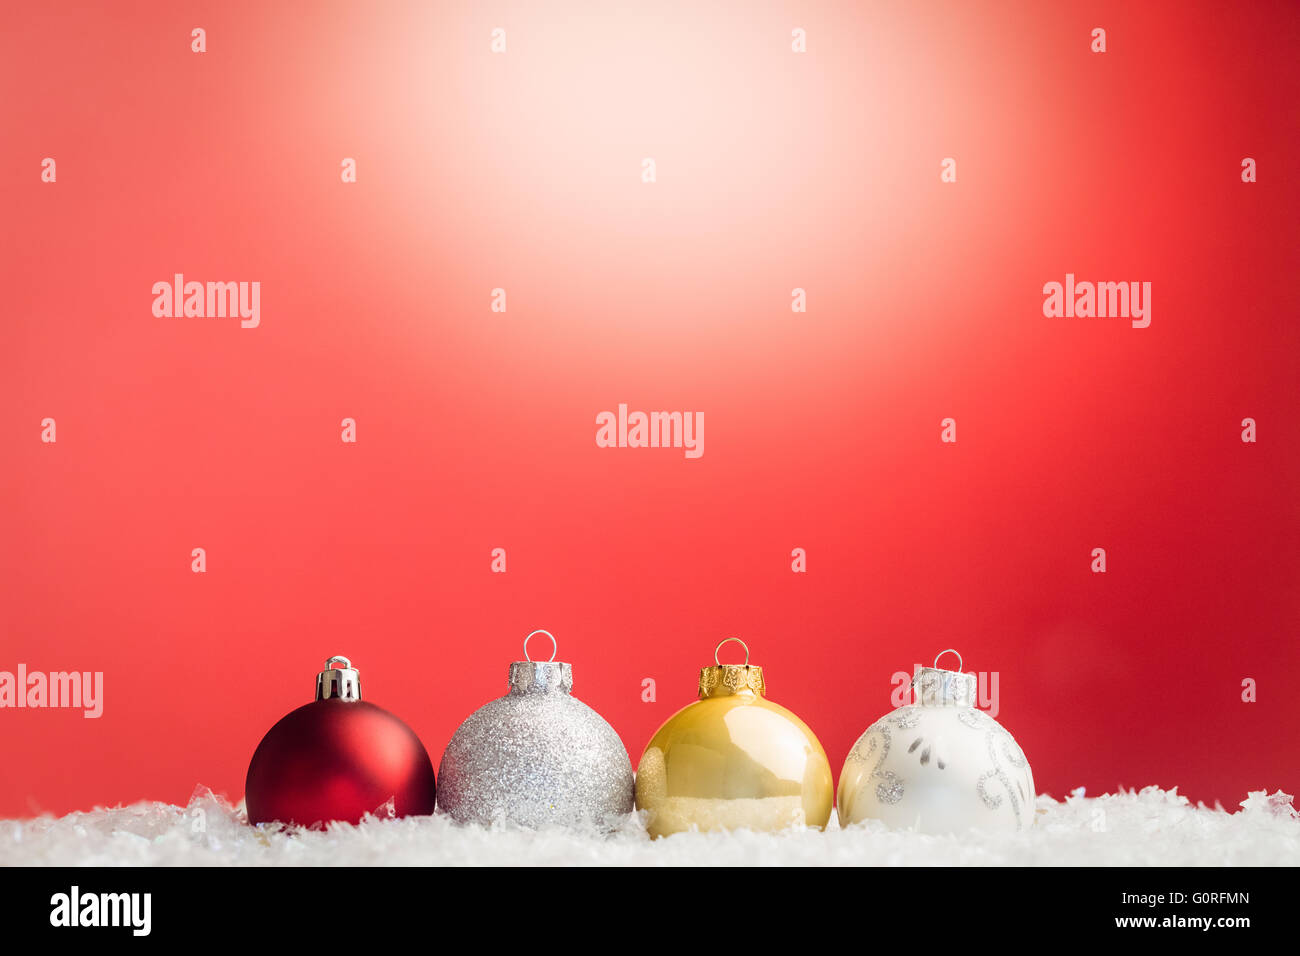 Composite image of Christmas bauble Stock Photo